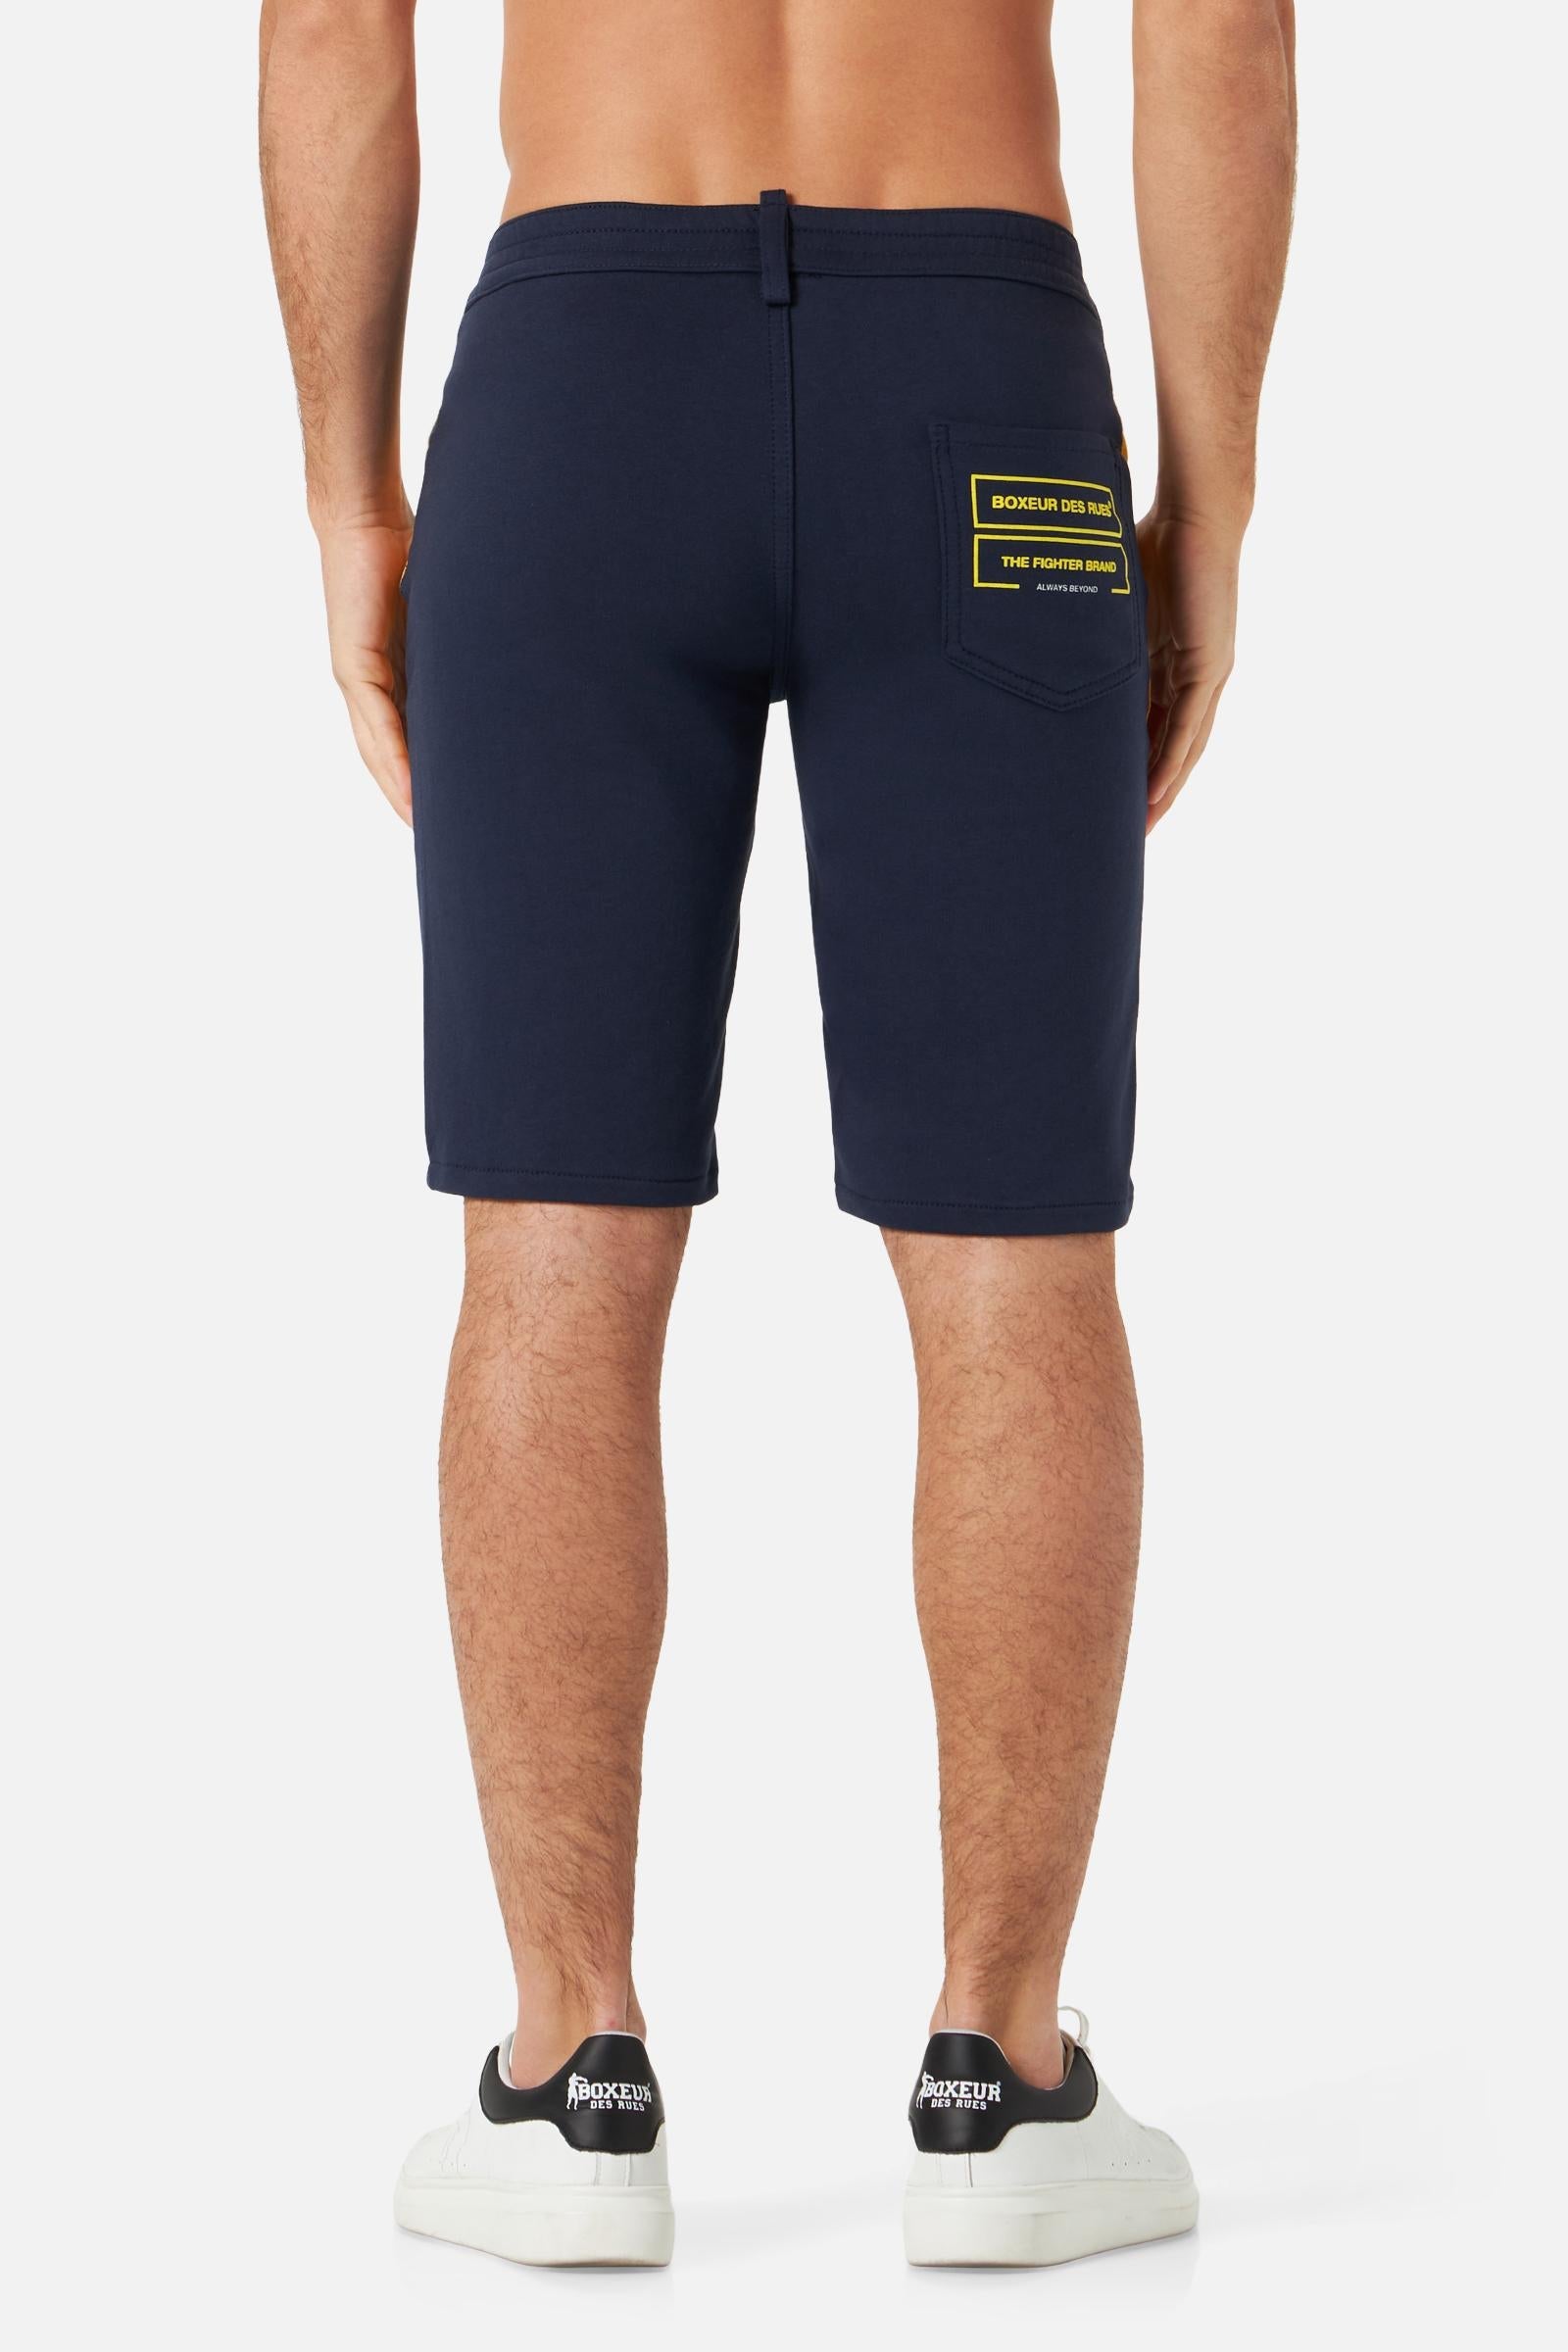 Mixed Fabric Shorts in Navy Jeansshorts Boxeur des Rues   